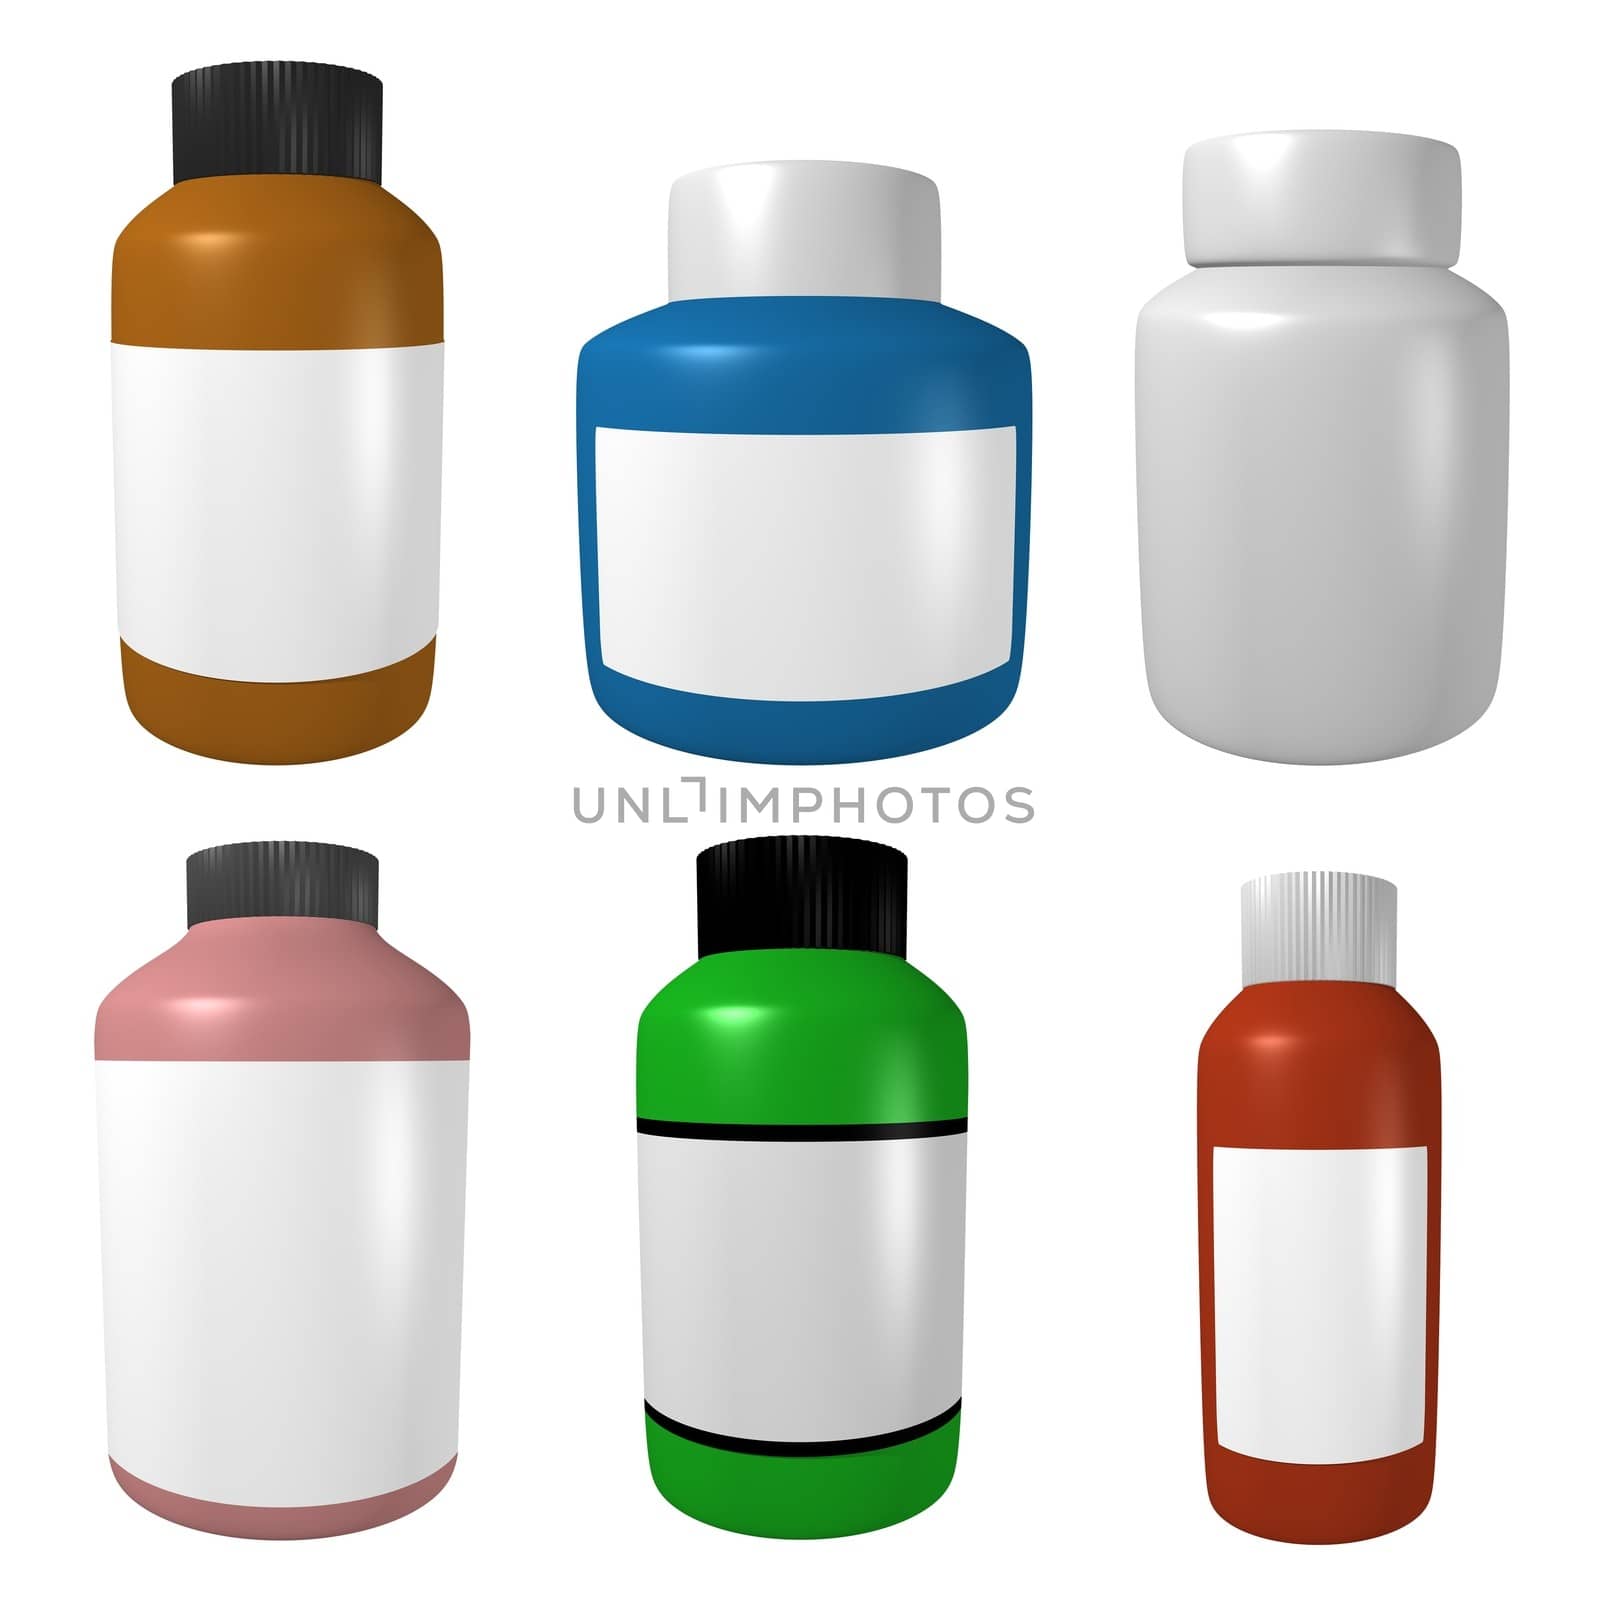 Plastic containers by darrenwhittingham